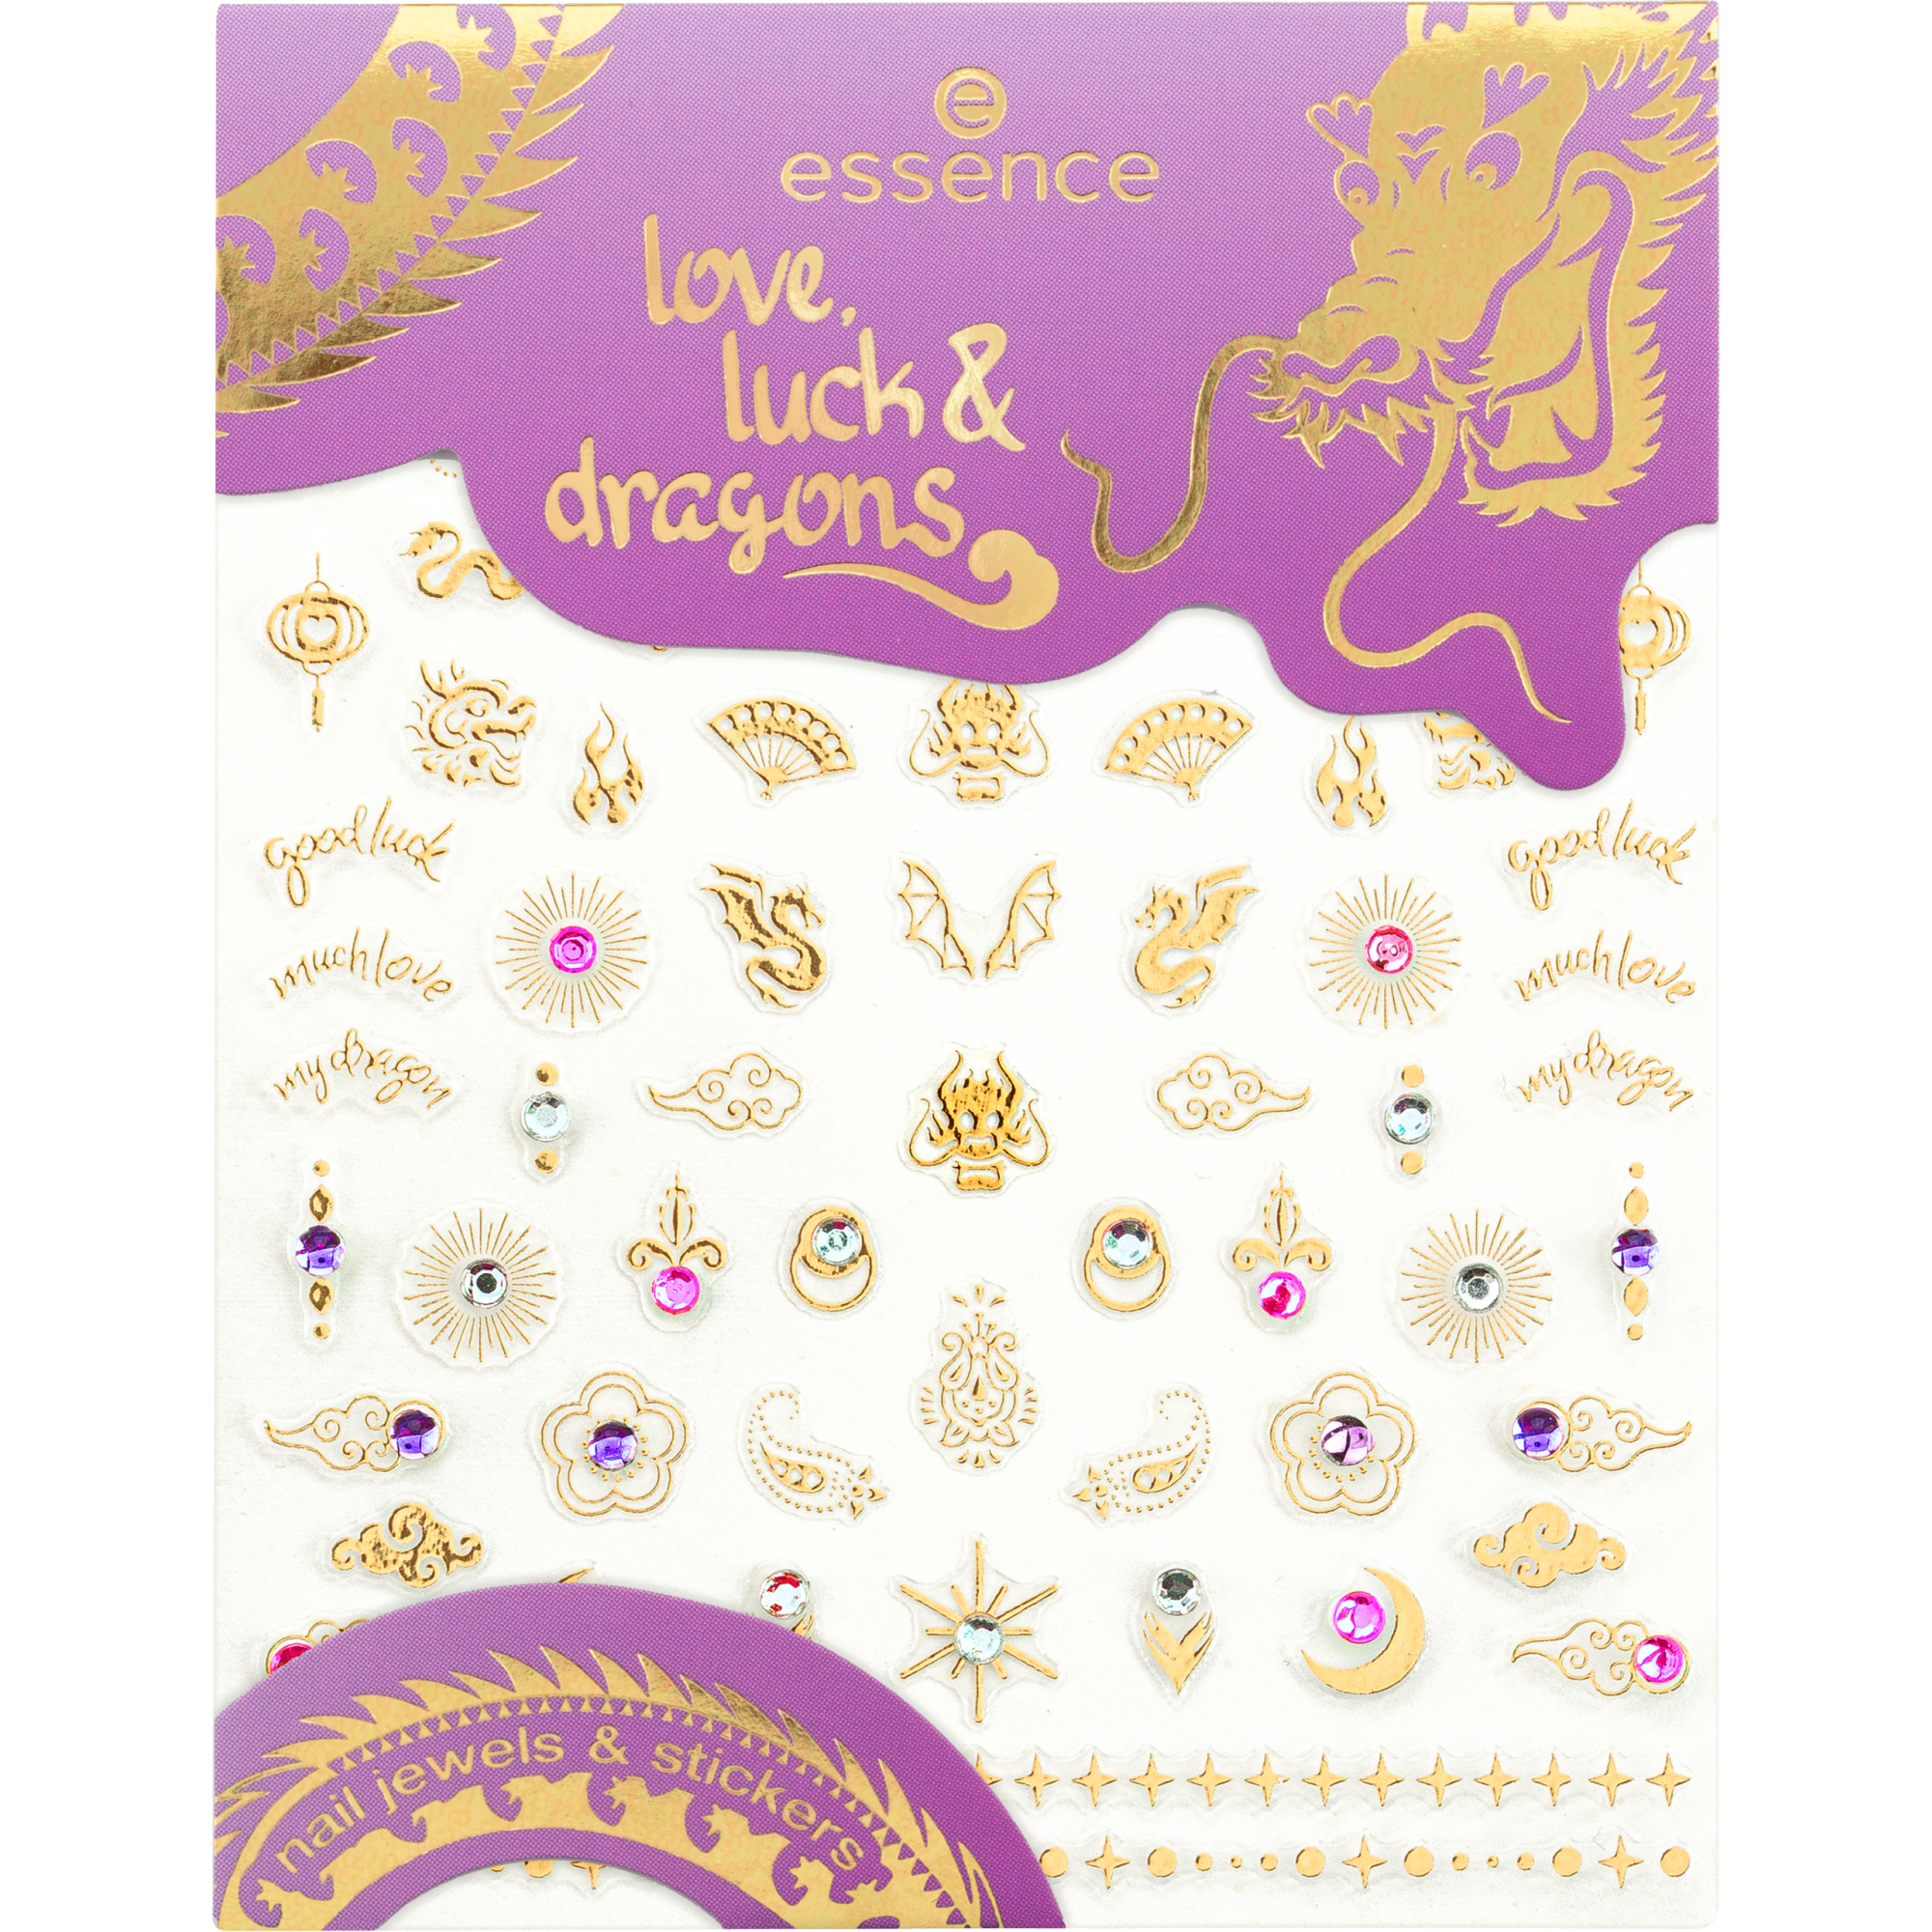 love, luck & dragons nail jewels & stickers bijoux et stickers ongles